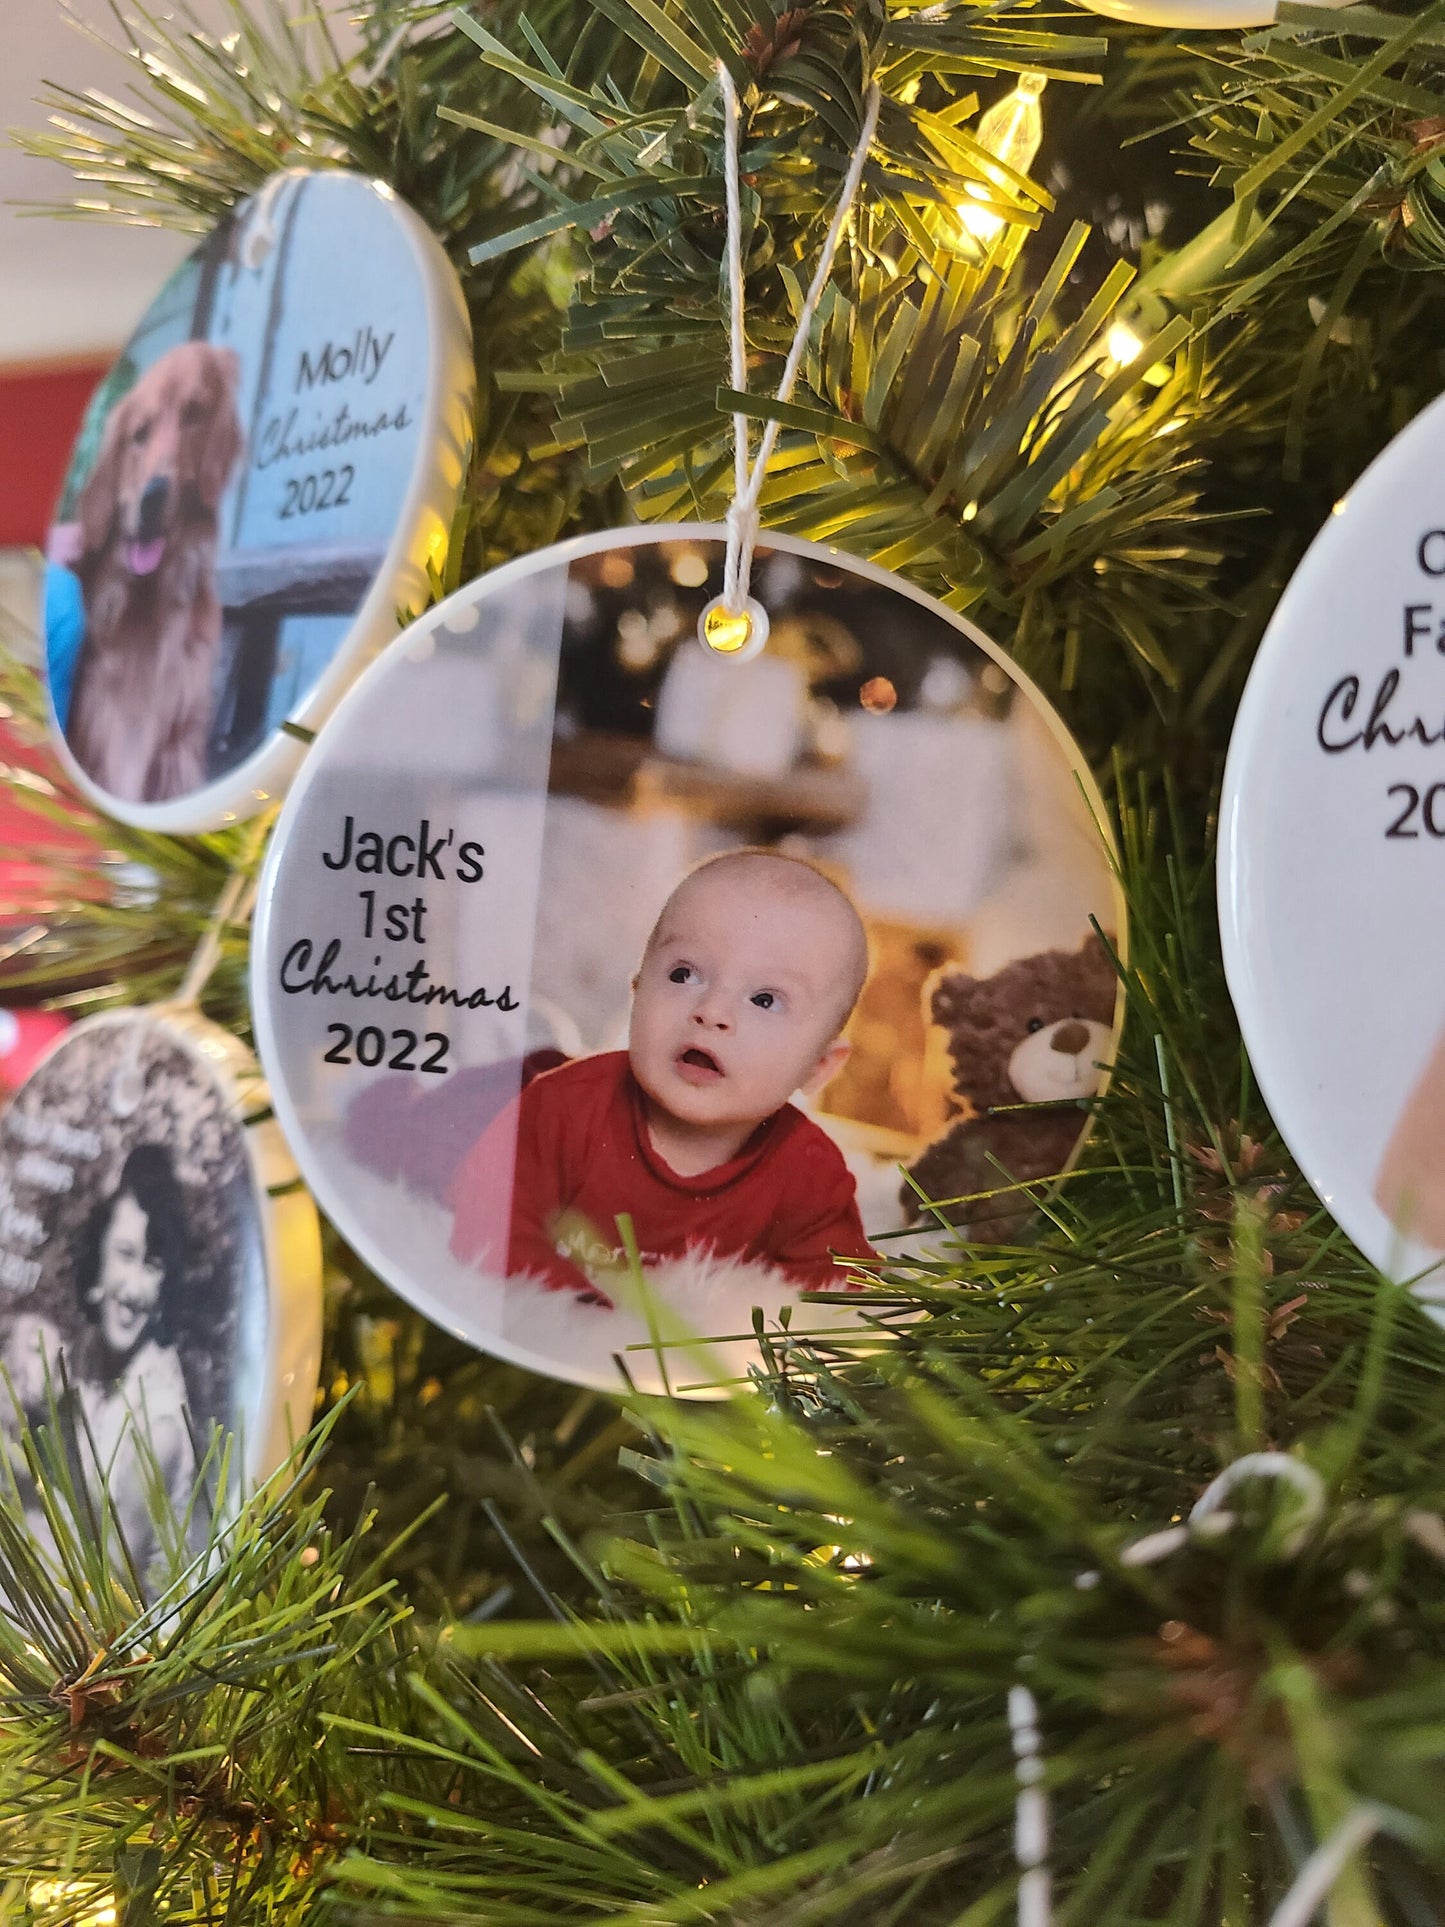 Ornament Baby's 1st, Christmas Ornament, Custom Ornament, Personalized Gift - picture of your baby and their name